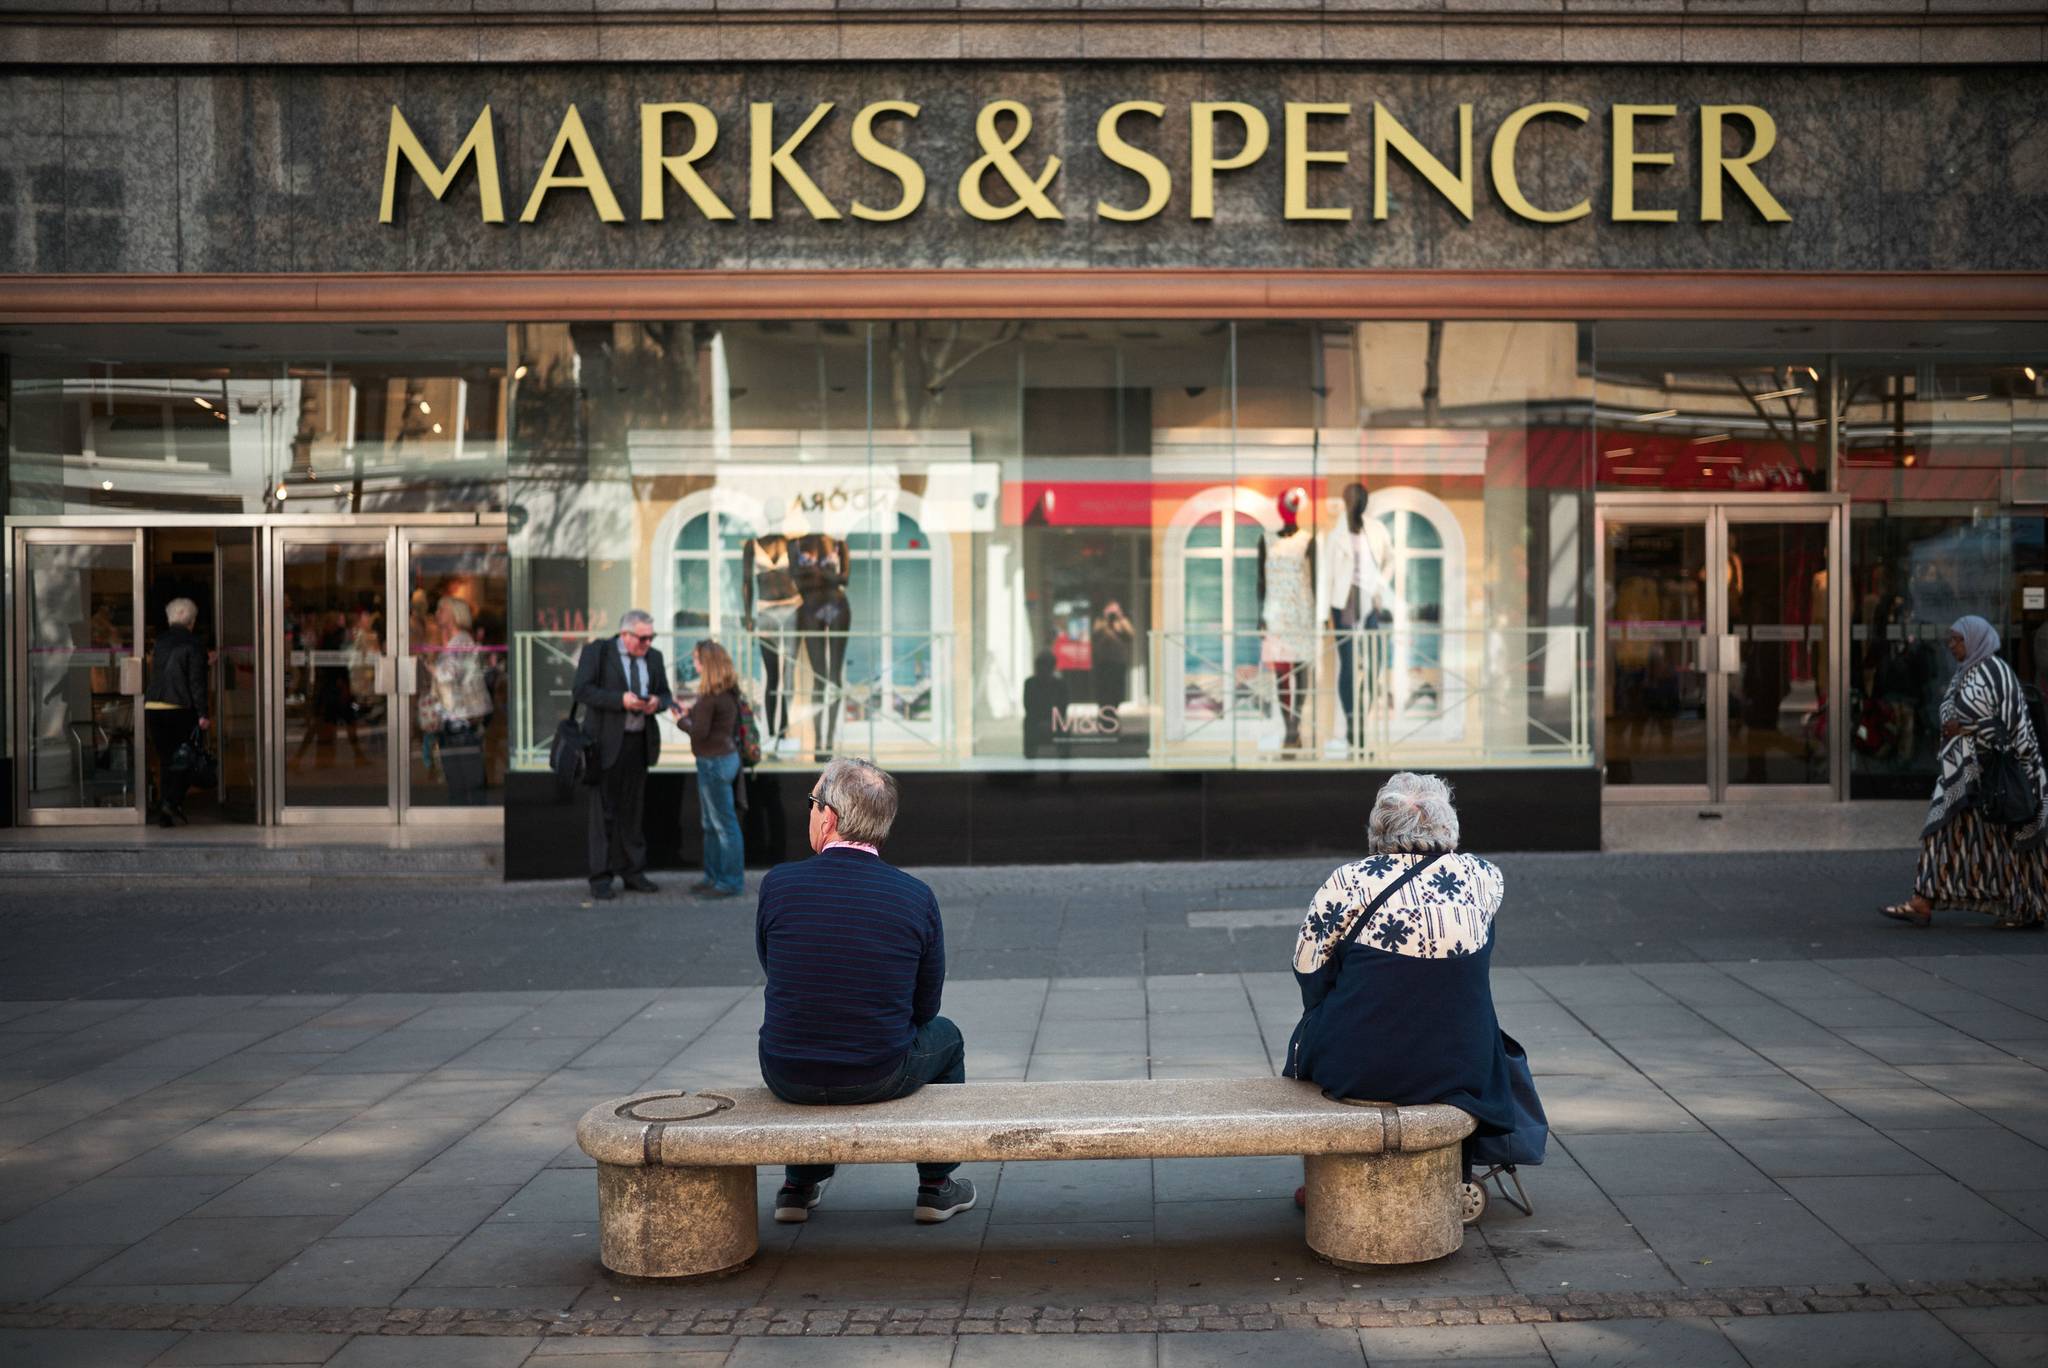 M&S meal deal is for discerning bargain hunters